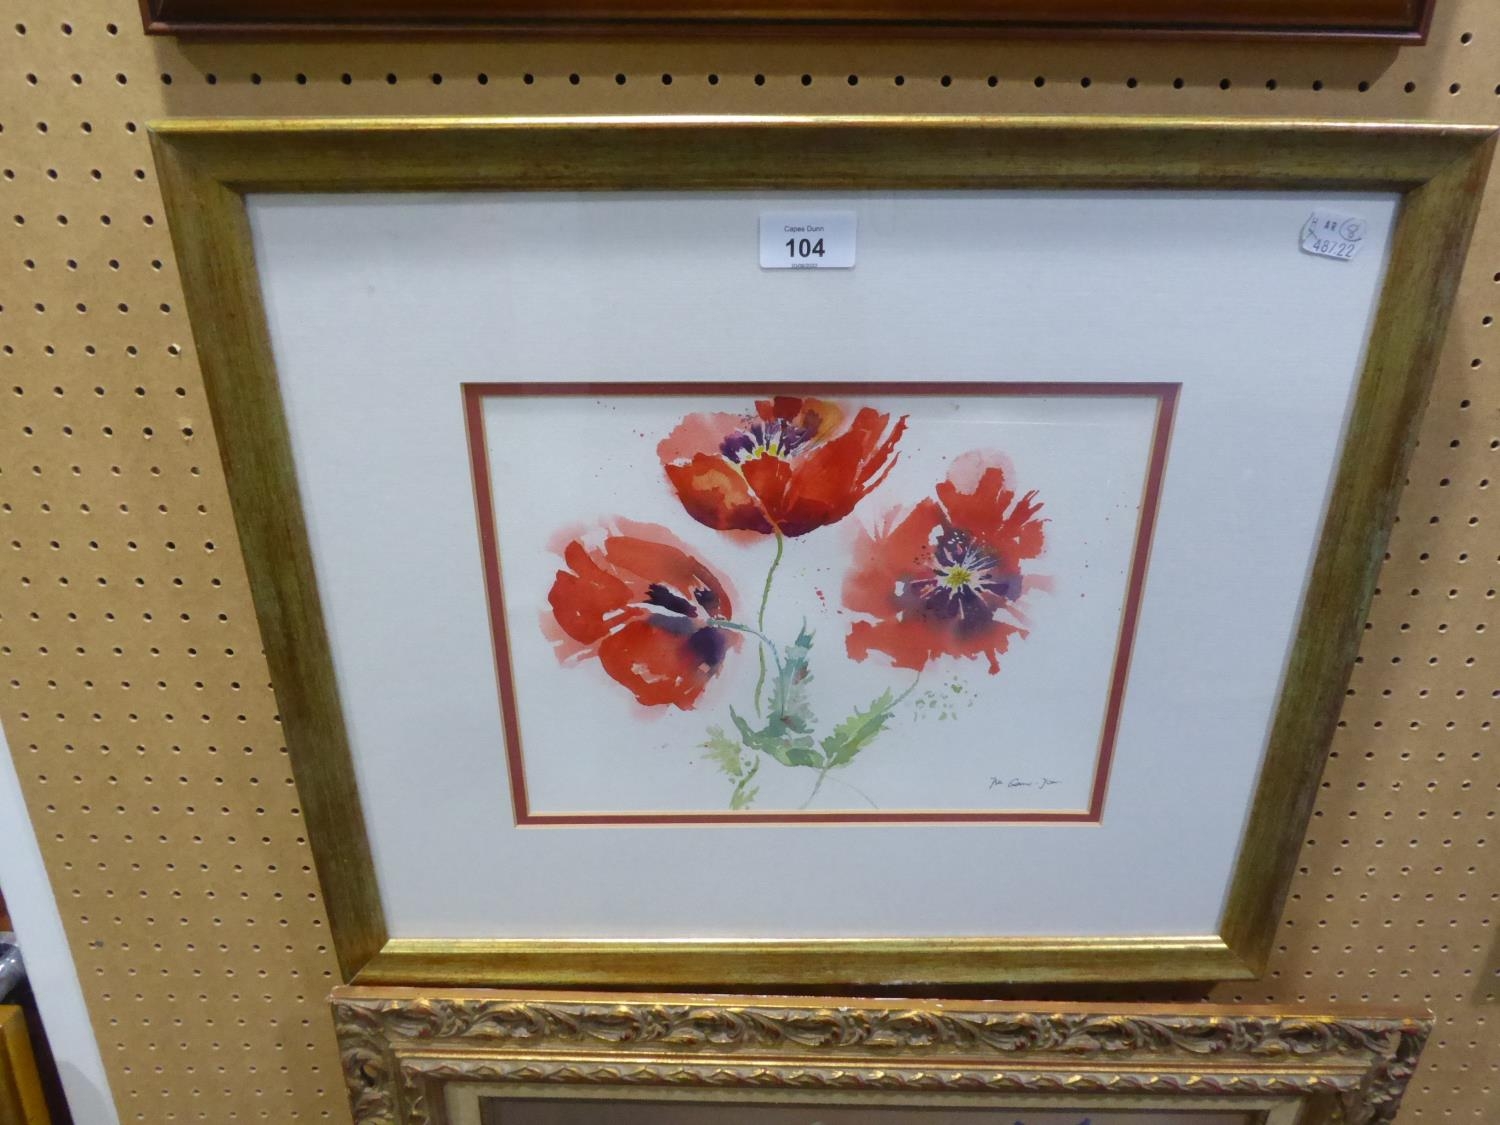 JILL GOWER-JONES WATERCOLOUR DRAWING 'POPPIES'  SIGNED LOWER RIGHT 9" X 11 1/2" (23cm x 29cm)